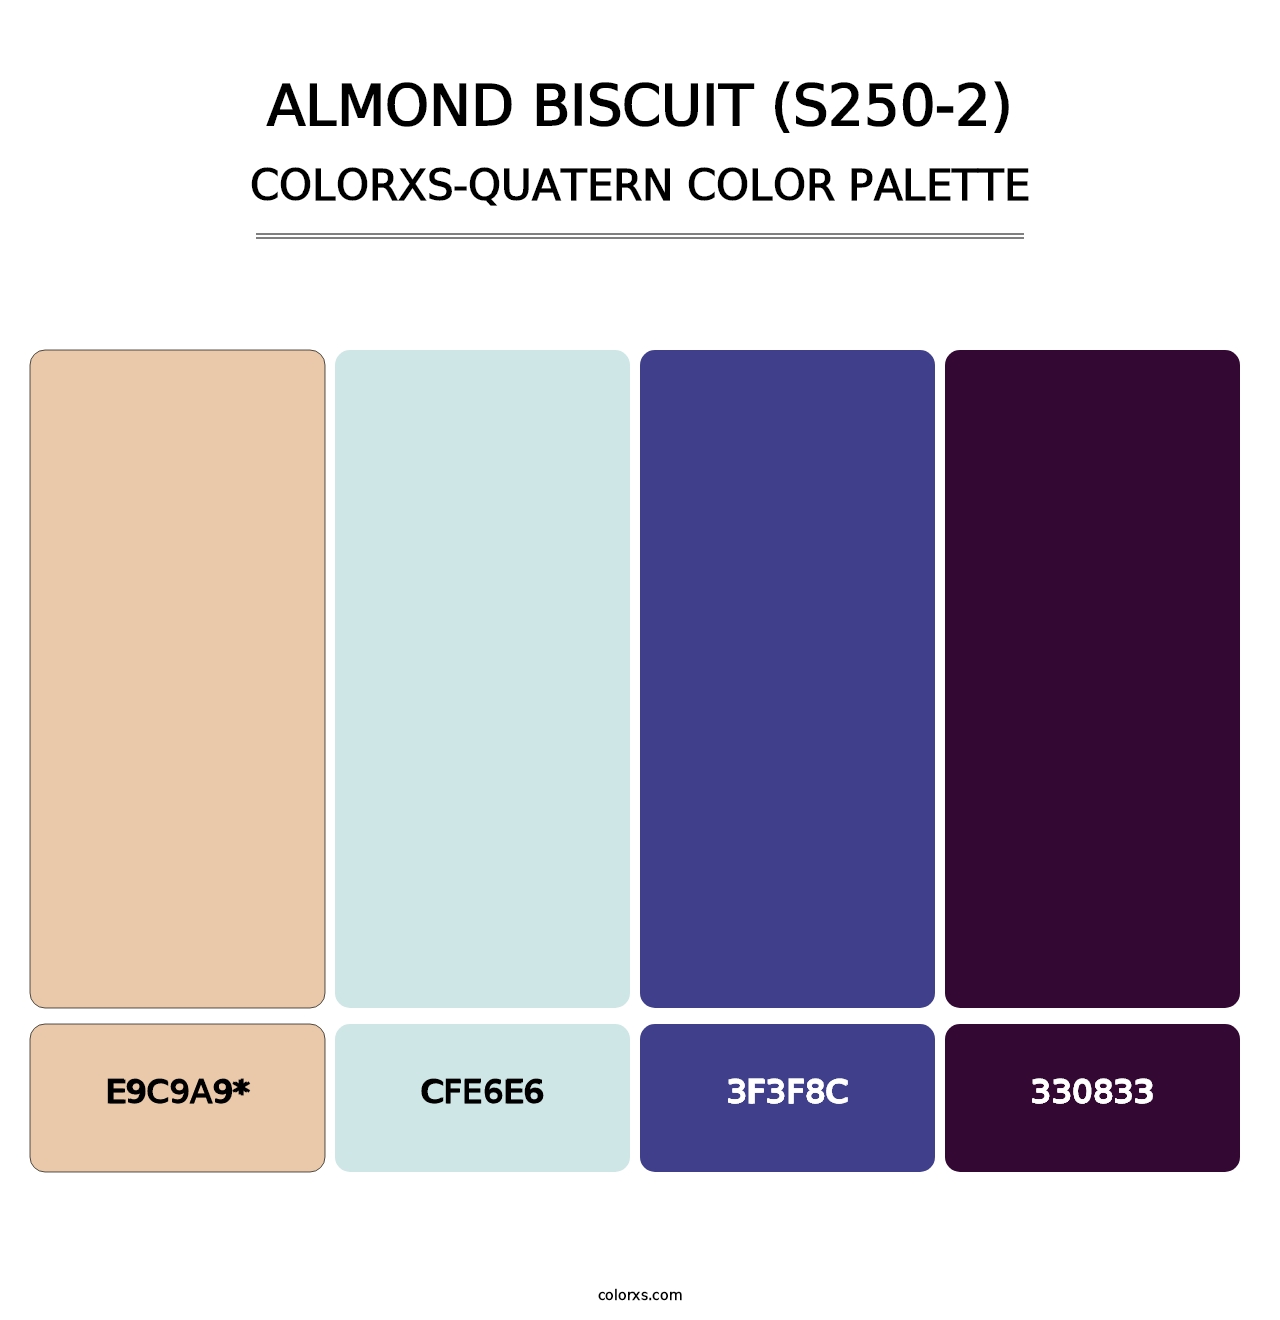 Almond Biscuit (S250-2) - Colorxs Quatern Palette